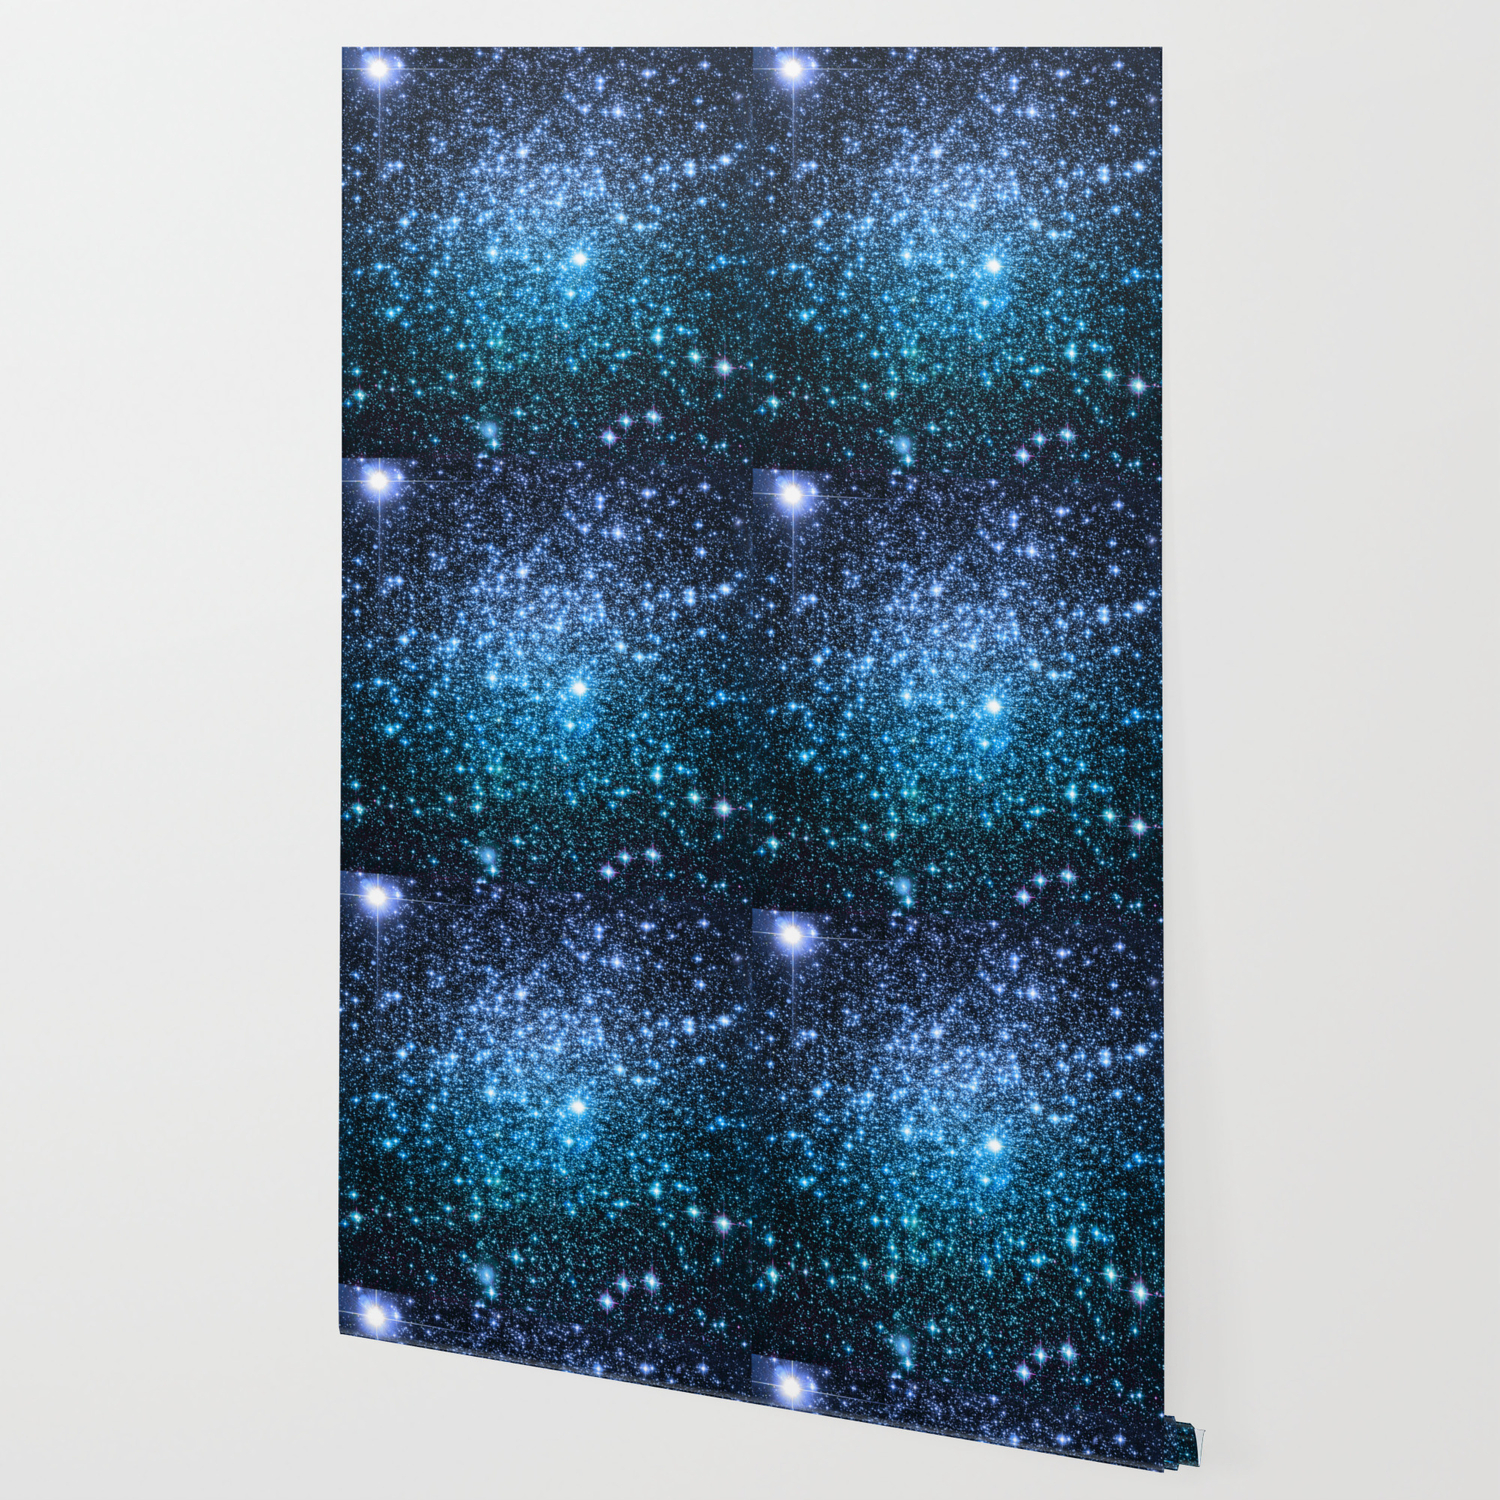 Galaxy Sparkle Stars Periwinkle Blue Turquoise Ombre Wallpaper by  2sweet4words Designs | Society6